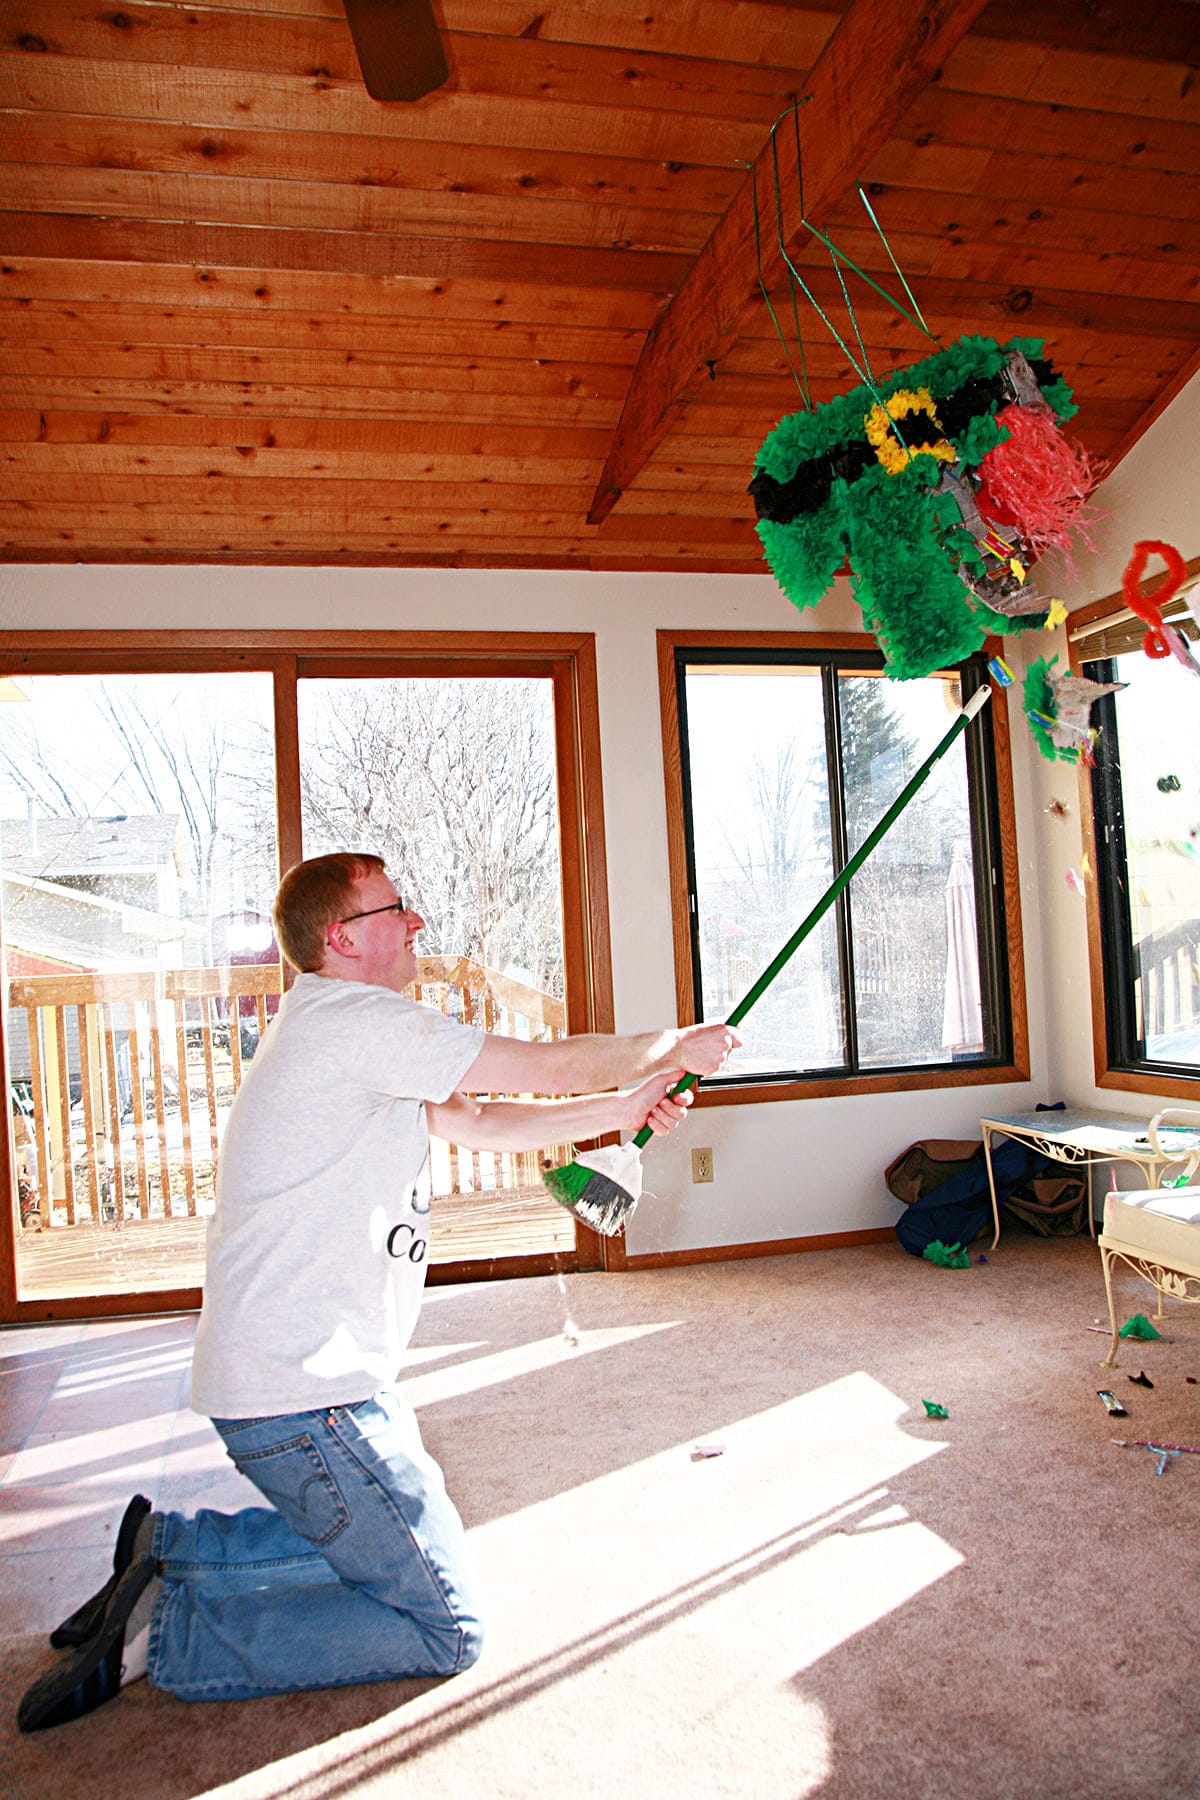 A young blond man wearing a t shirt with a white and black cow print pi symbol on it hits a pinata with a stick.